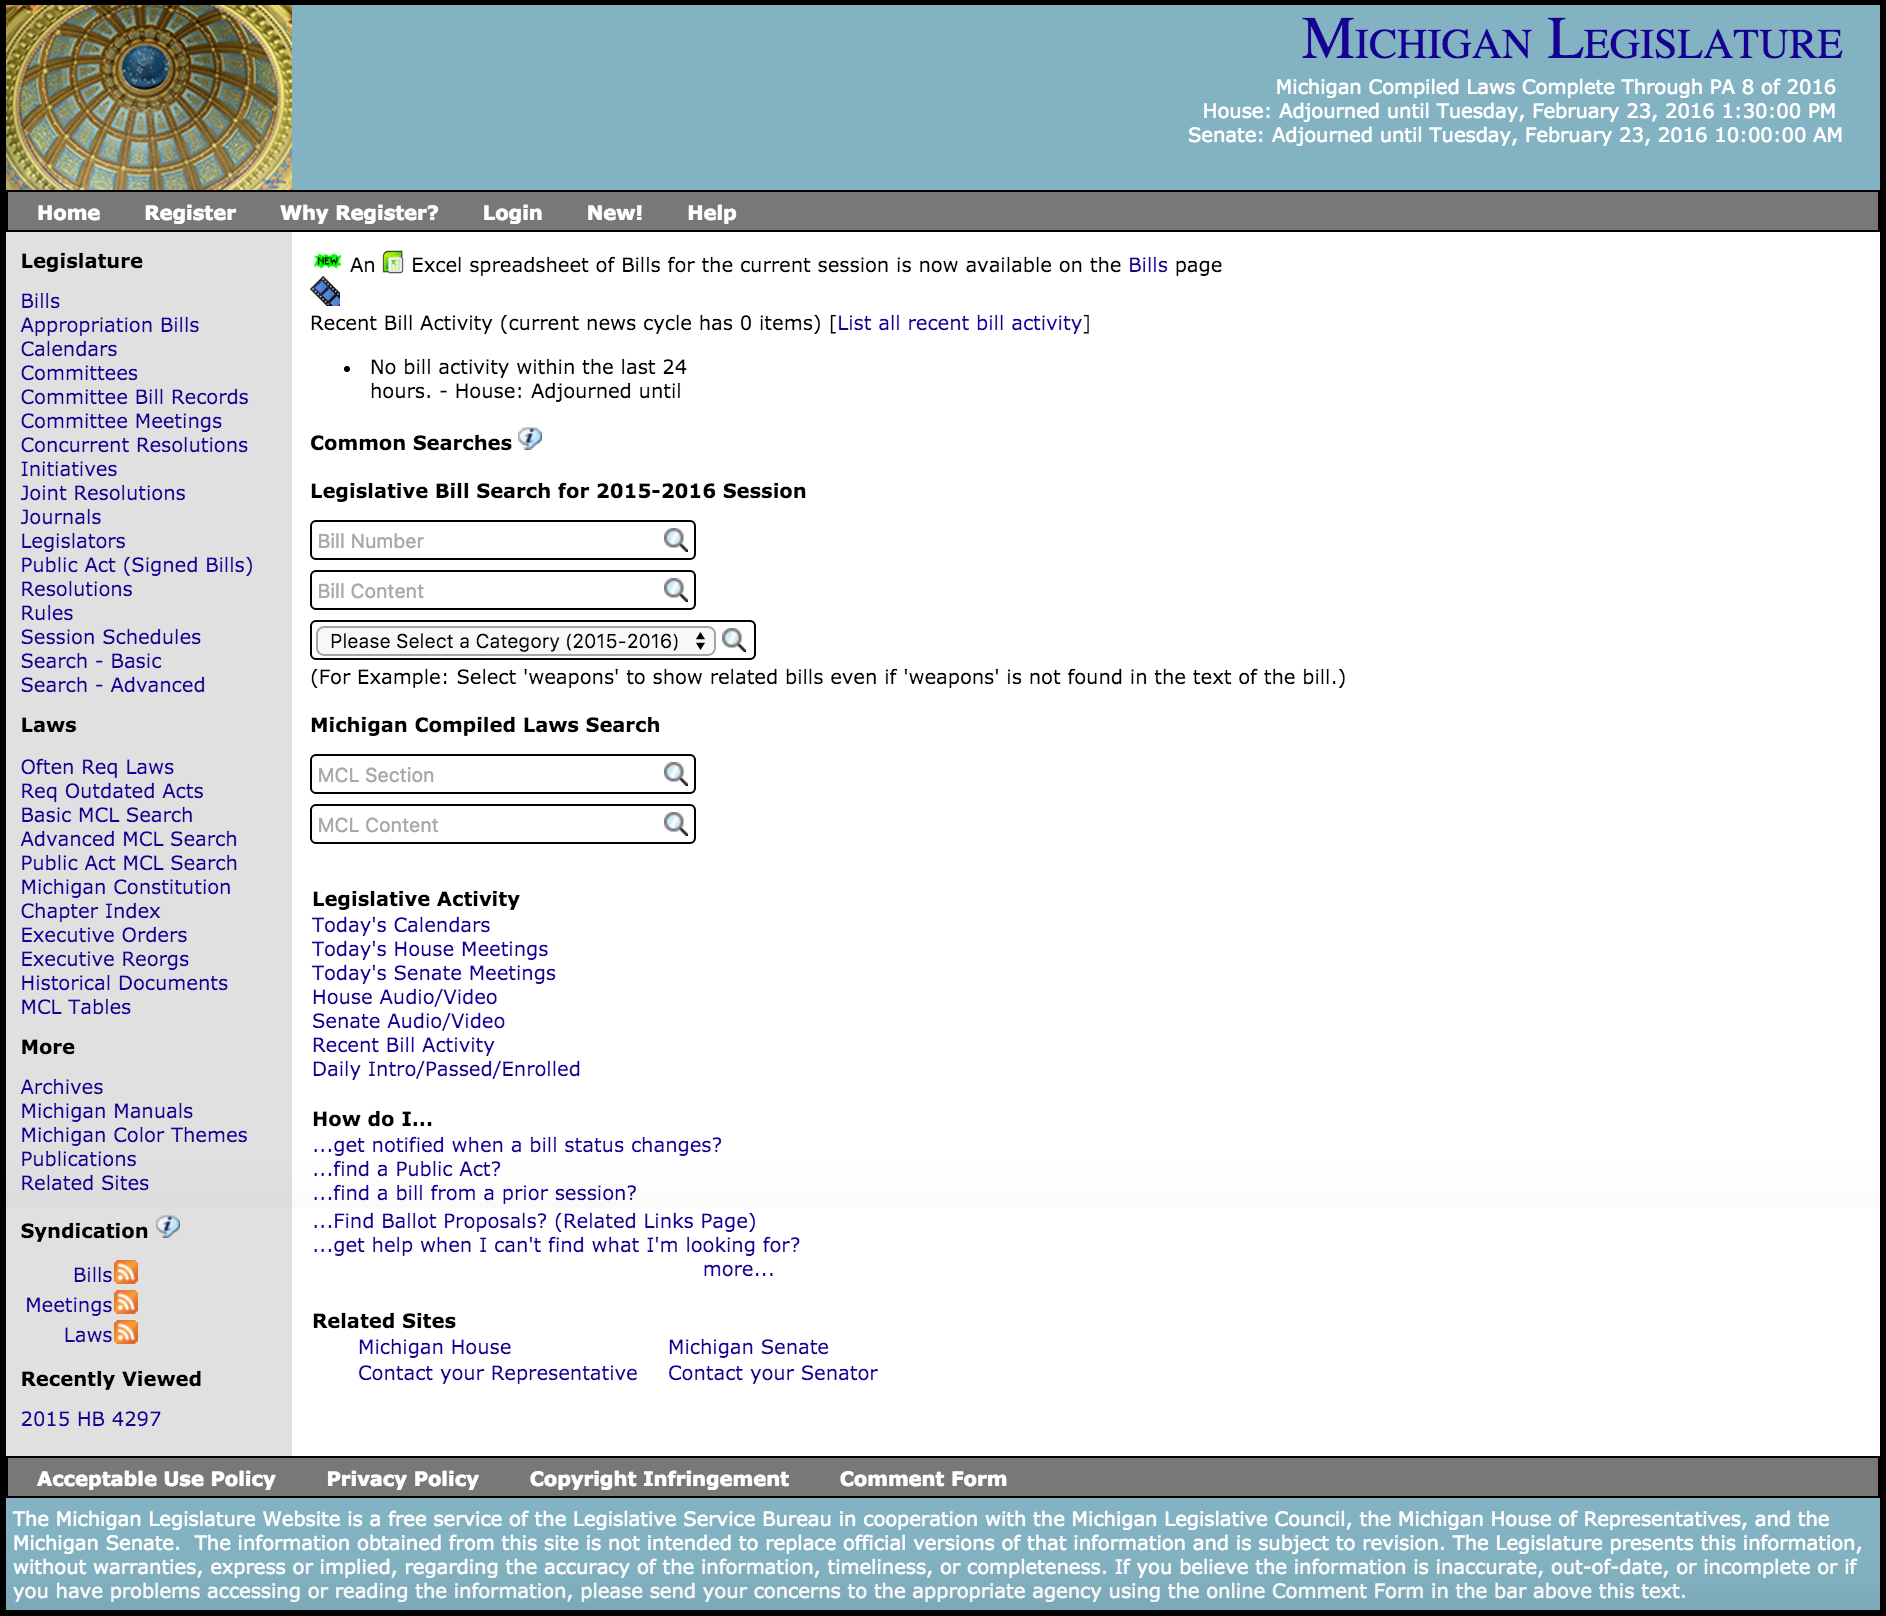 Fig. 1 - Home Page of www.legislature.mi.gov. From here you can quickly and easily find anything in Michigan's legislative process or history. Click image to enlarge.